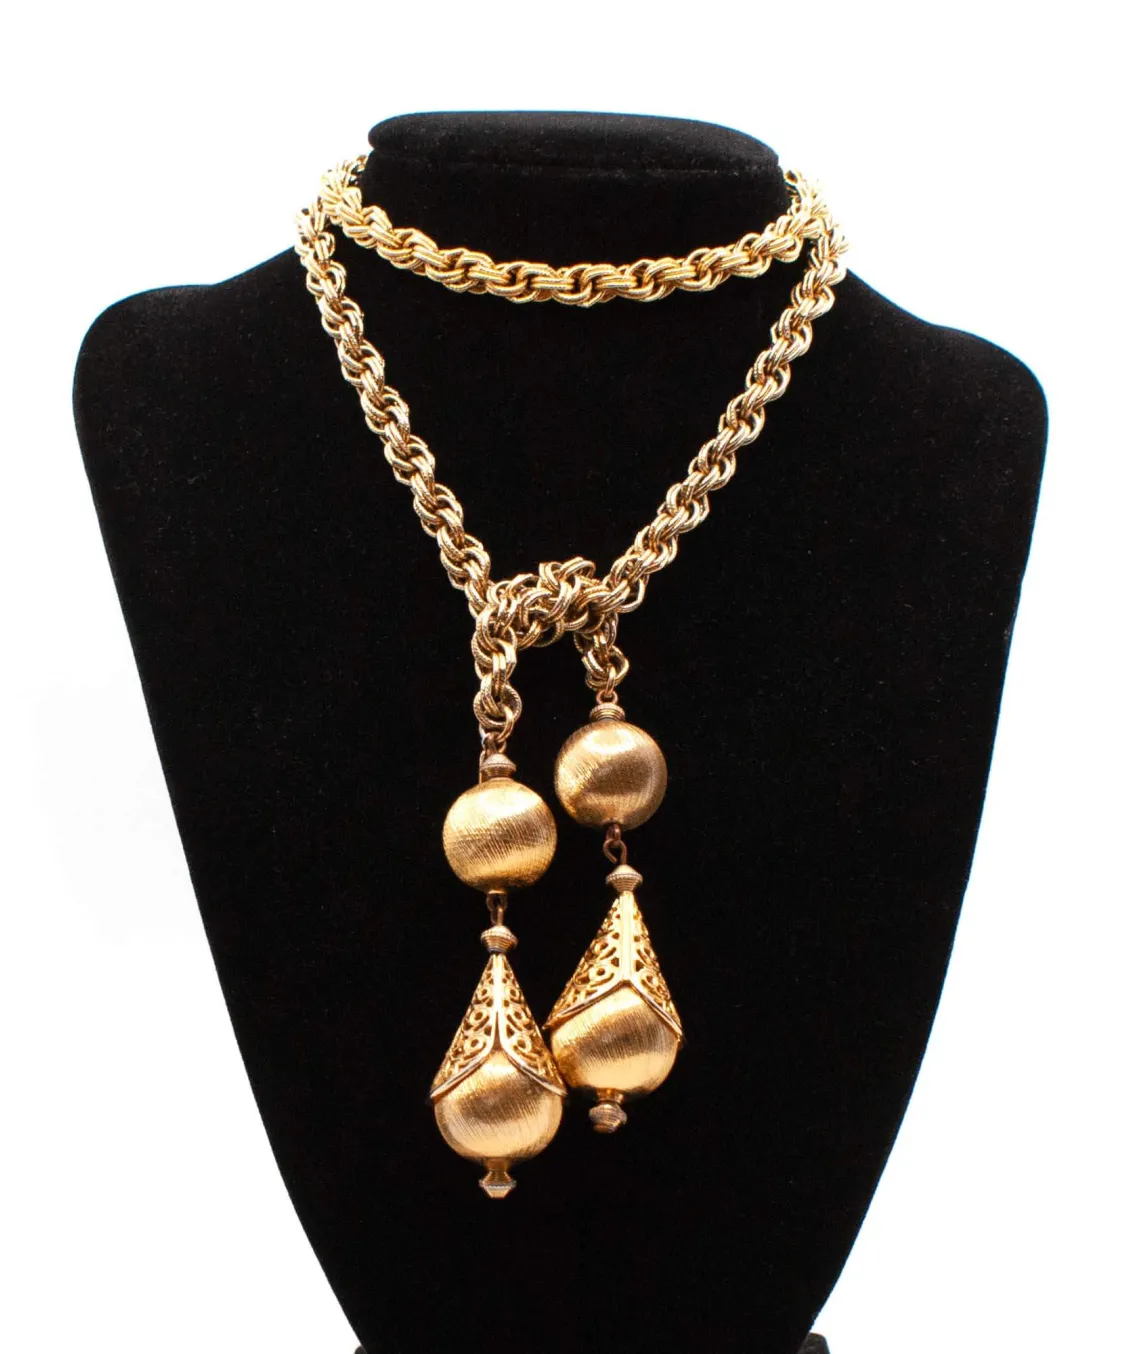 Monet gold plated Bolero necklace with charms tied on